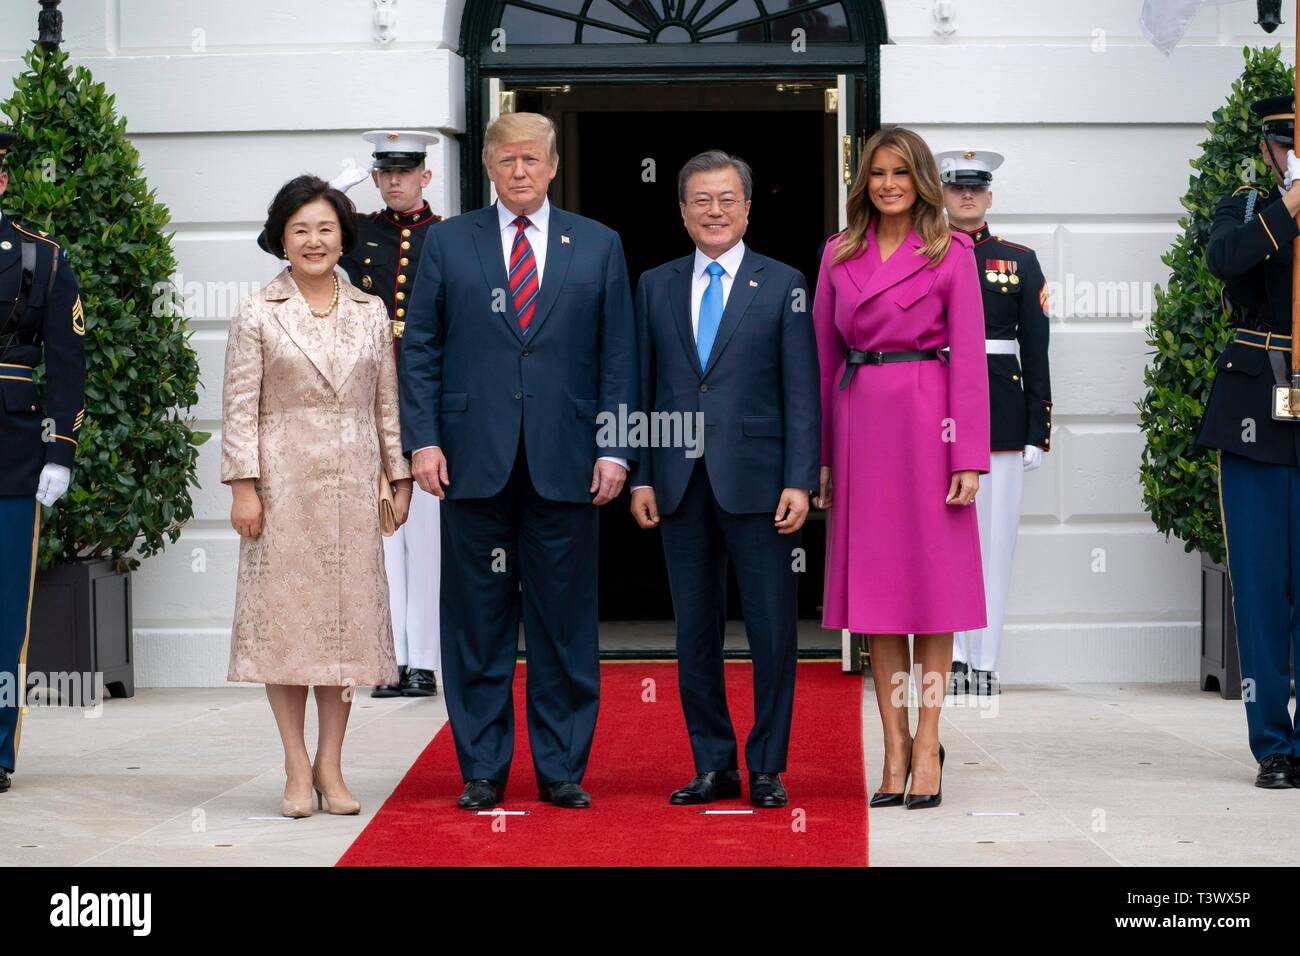 Washington, United States Of America. 11th Apr, 2019. U.S. President Donald Trump, stands with South Korean President Moon Jae-in, Mrs. Kim Jung-sook and First Lady Melania Trump during arrival ceremonies at the South Portico entrance of the White House April 11, 2019 in Washington, DC Credit: Planetpix/Alamy Live News Stock Photo